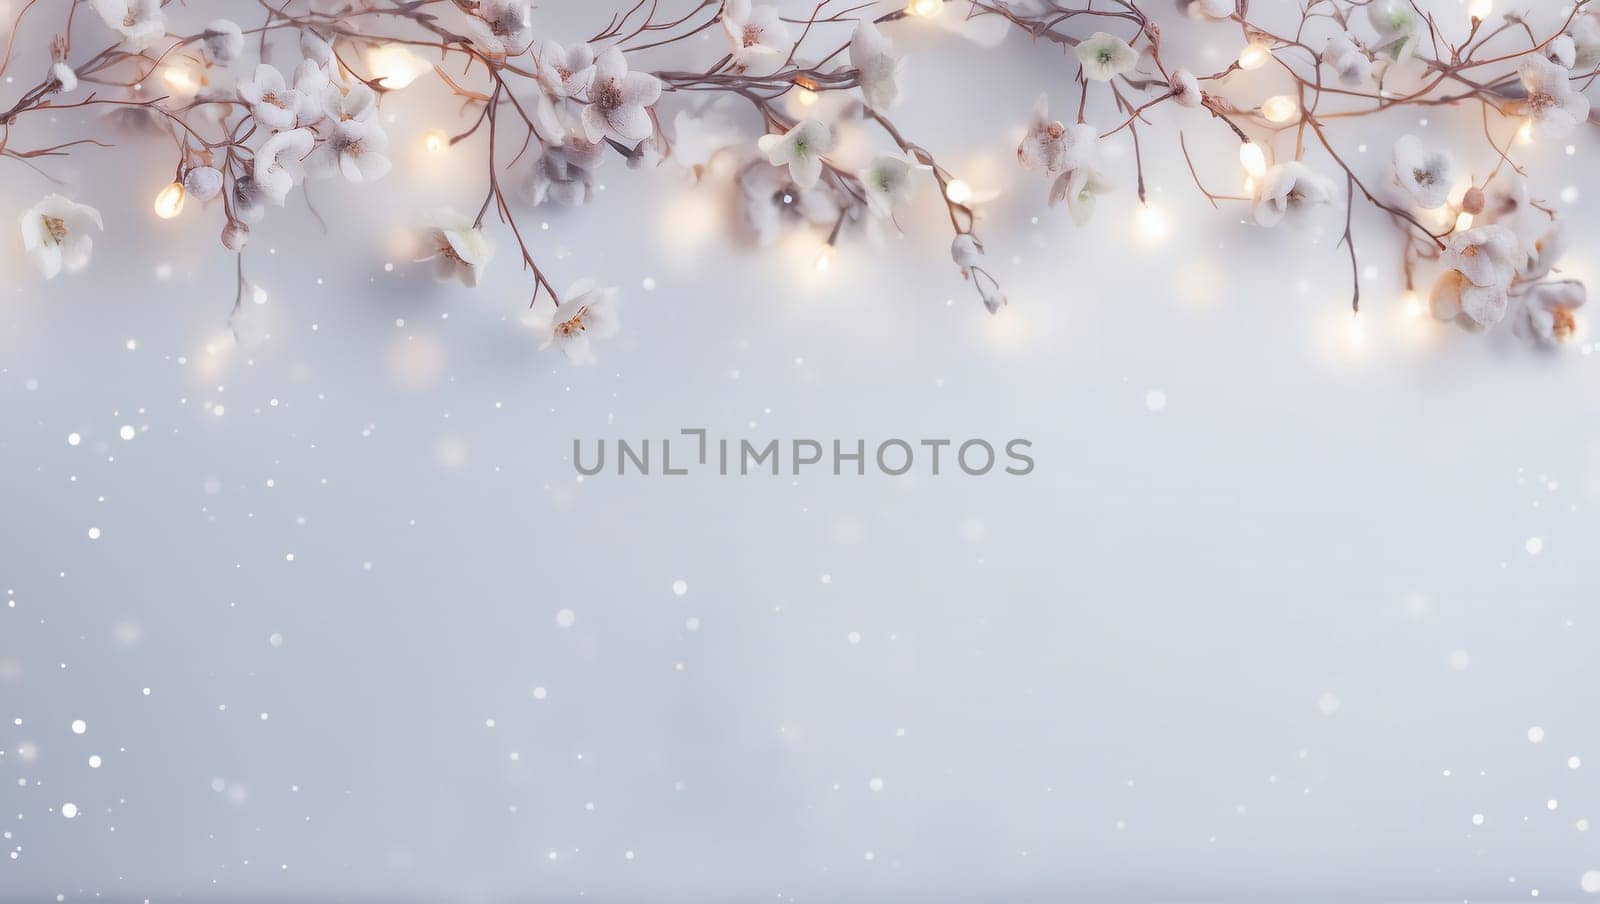 New Year's background. Falling snow that falls in winter. High quality illustration